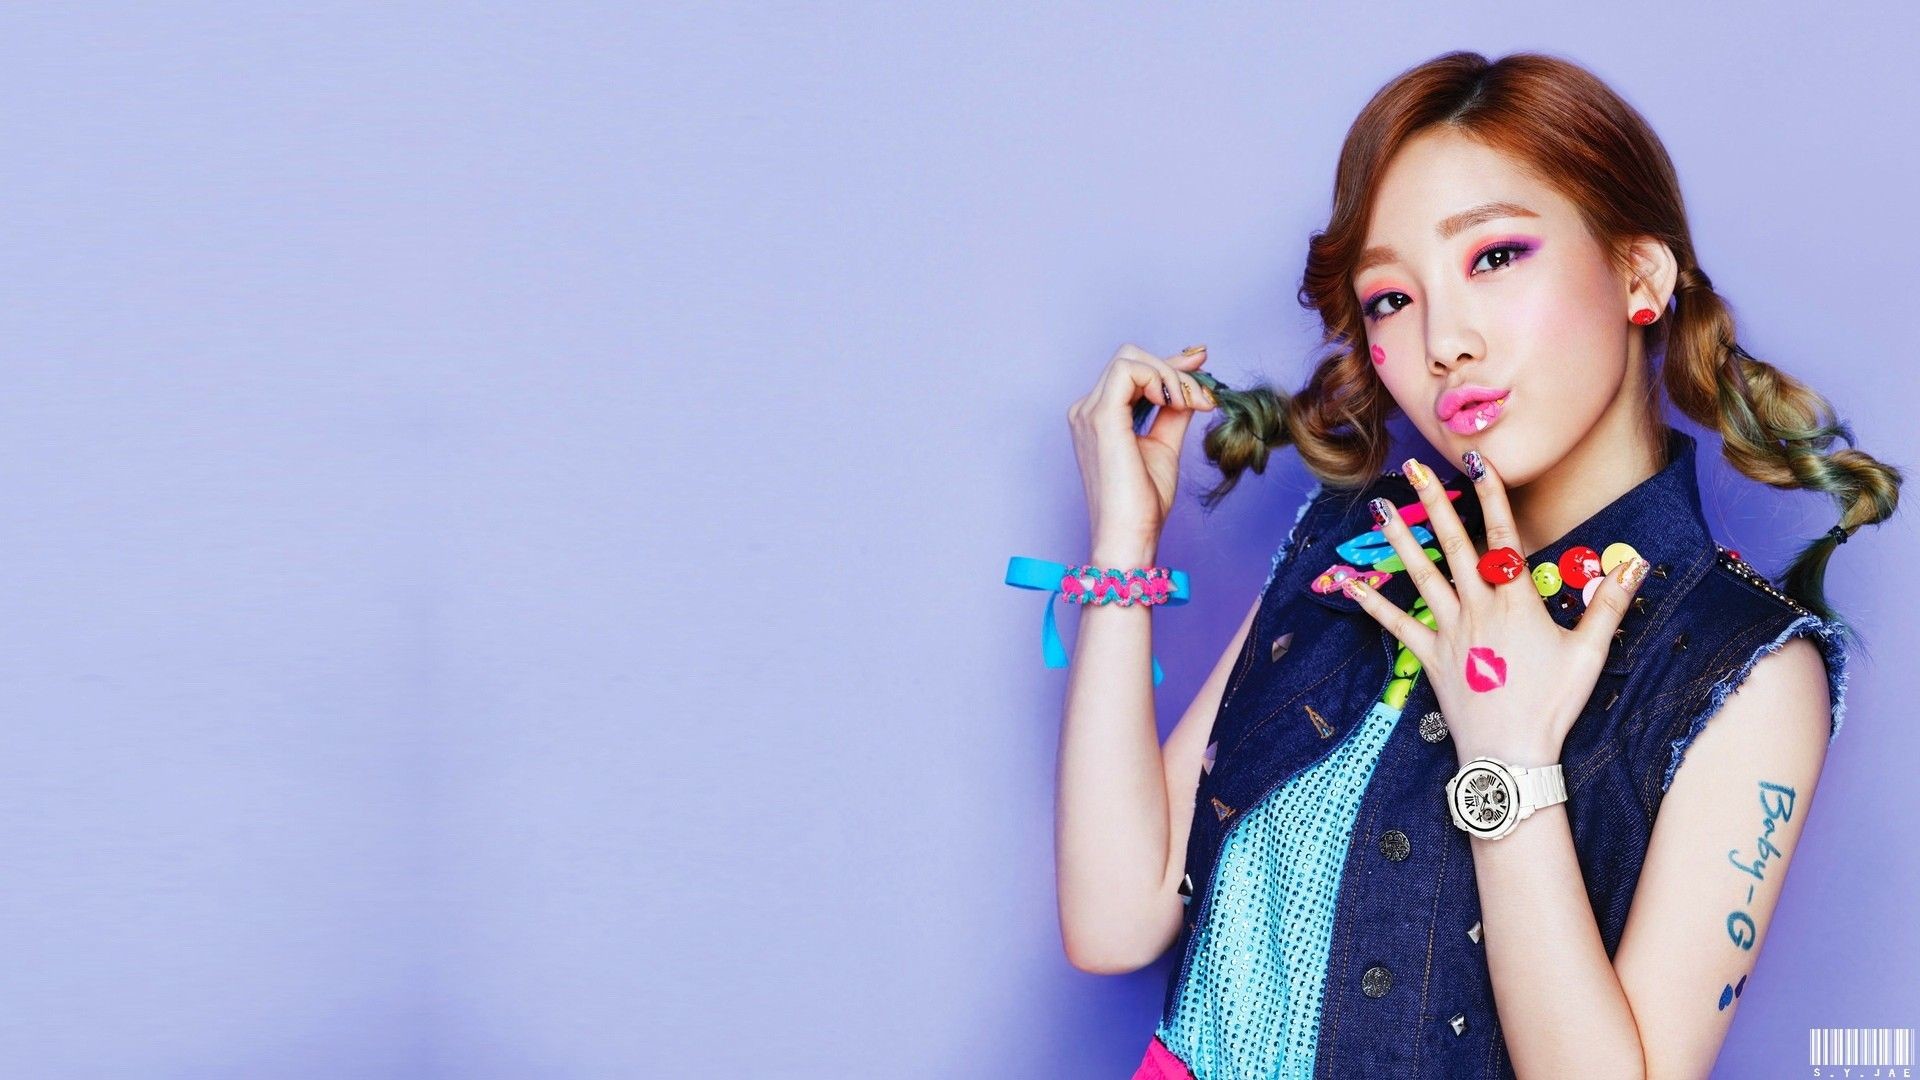 1920x1080 ... Lovely Taeyeon Super HD Background Wallpapers Gallery, OZL-2131590 ...